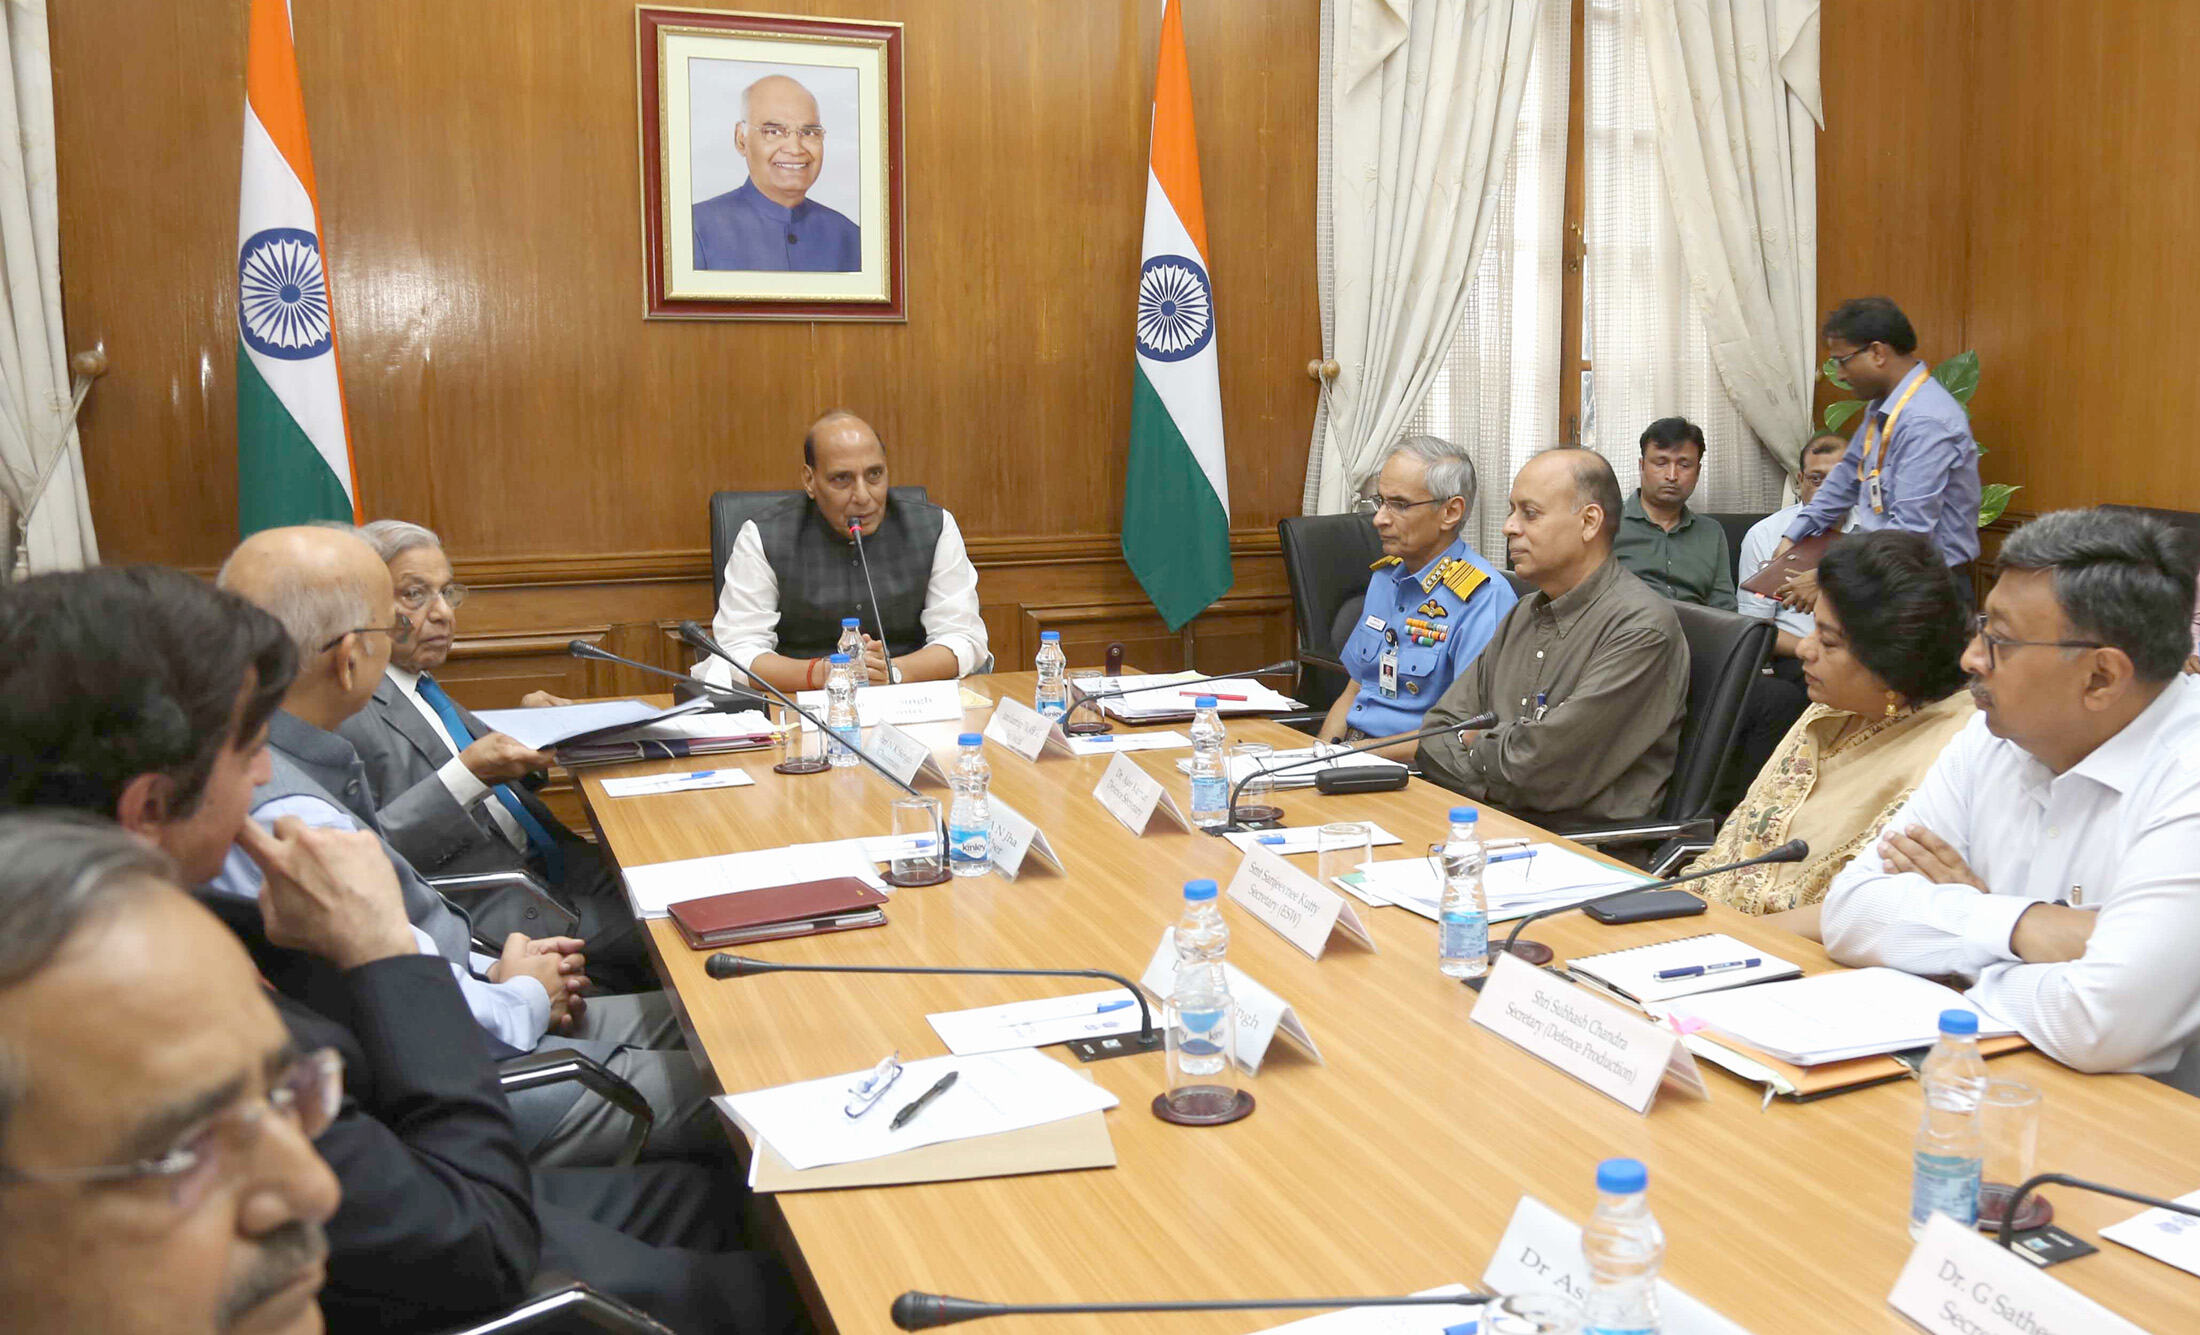 The Union Minister for Defence, Rajnath Singh in a meeting with the Chairman of the 15th Finance Commission, N.K. Singh, in New Delhi